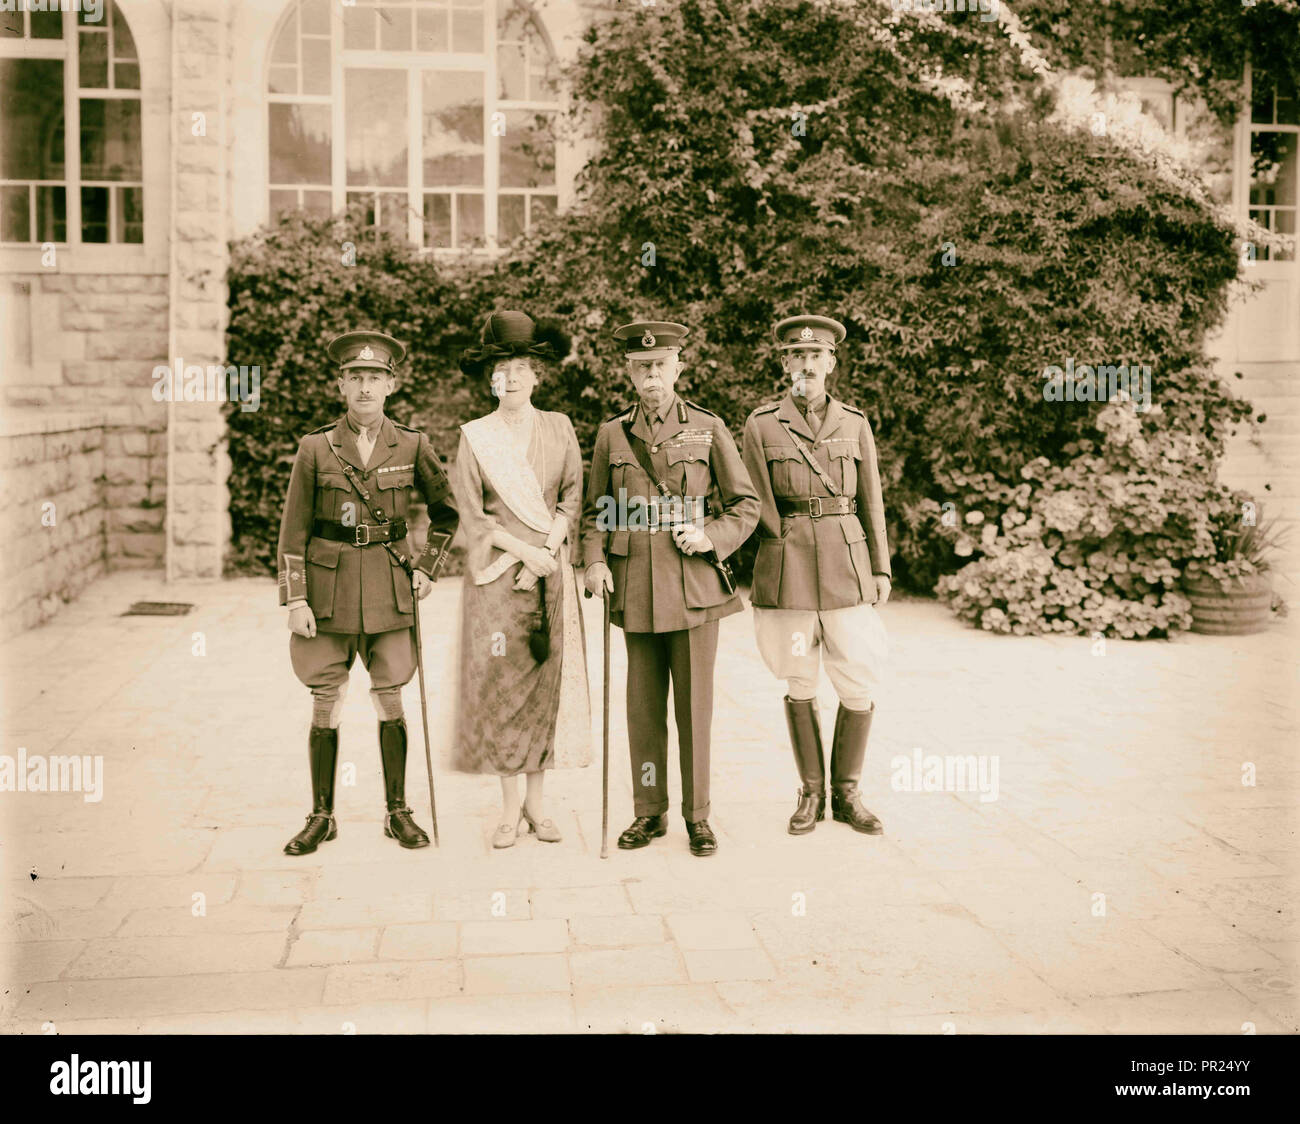 Lord & Lady Plumer, flanked by 2 officers. 1925, Jerusalem, Israel Stock Photo